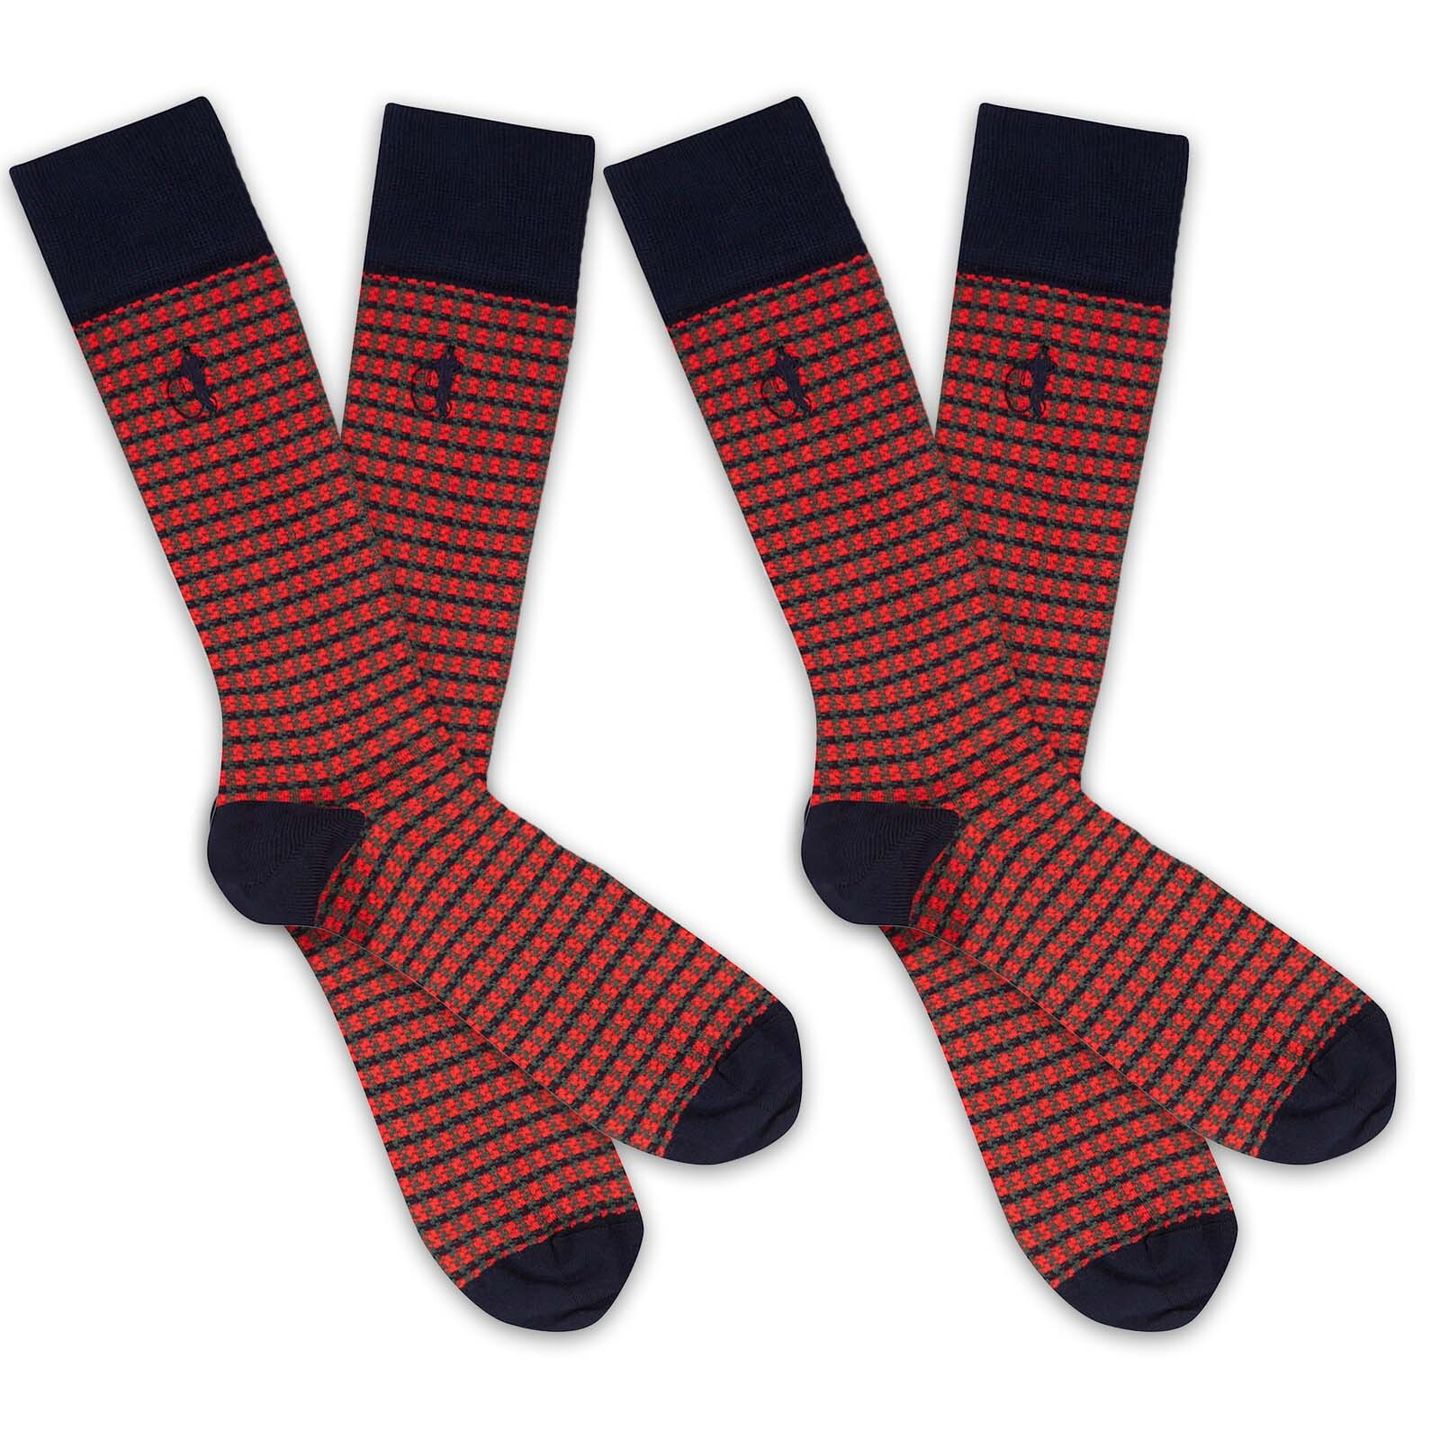 Red and black chequered socks from the Shaken and Stirred collection